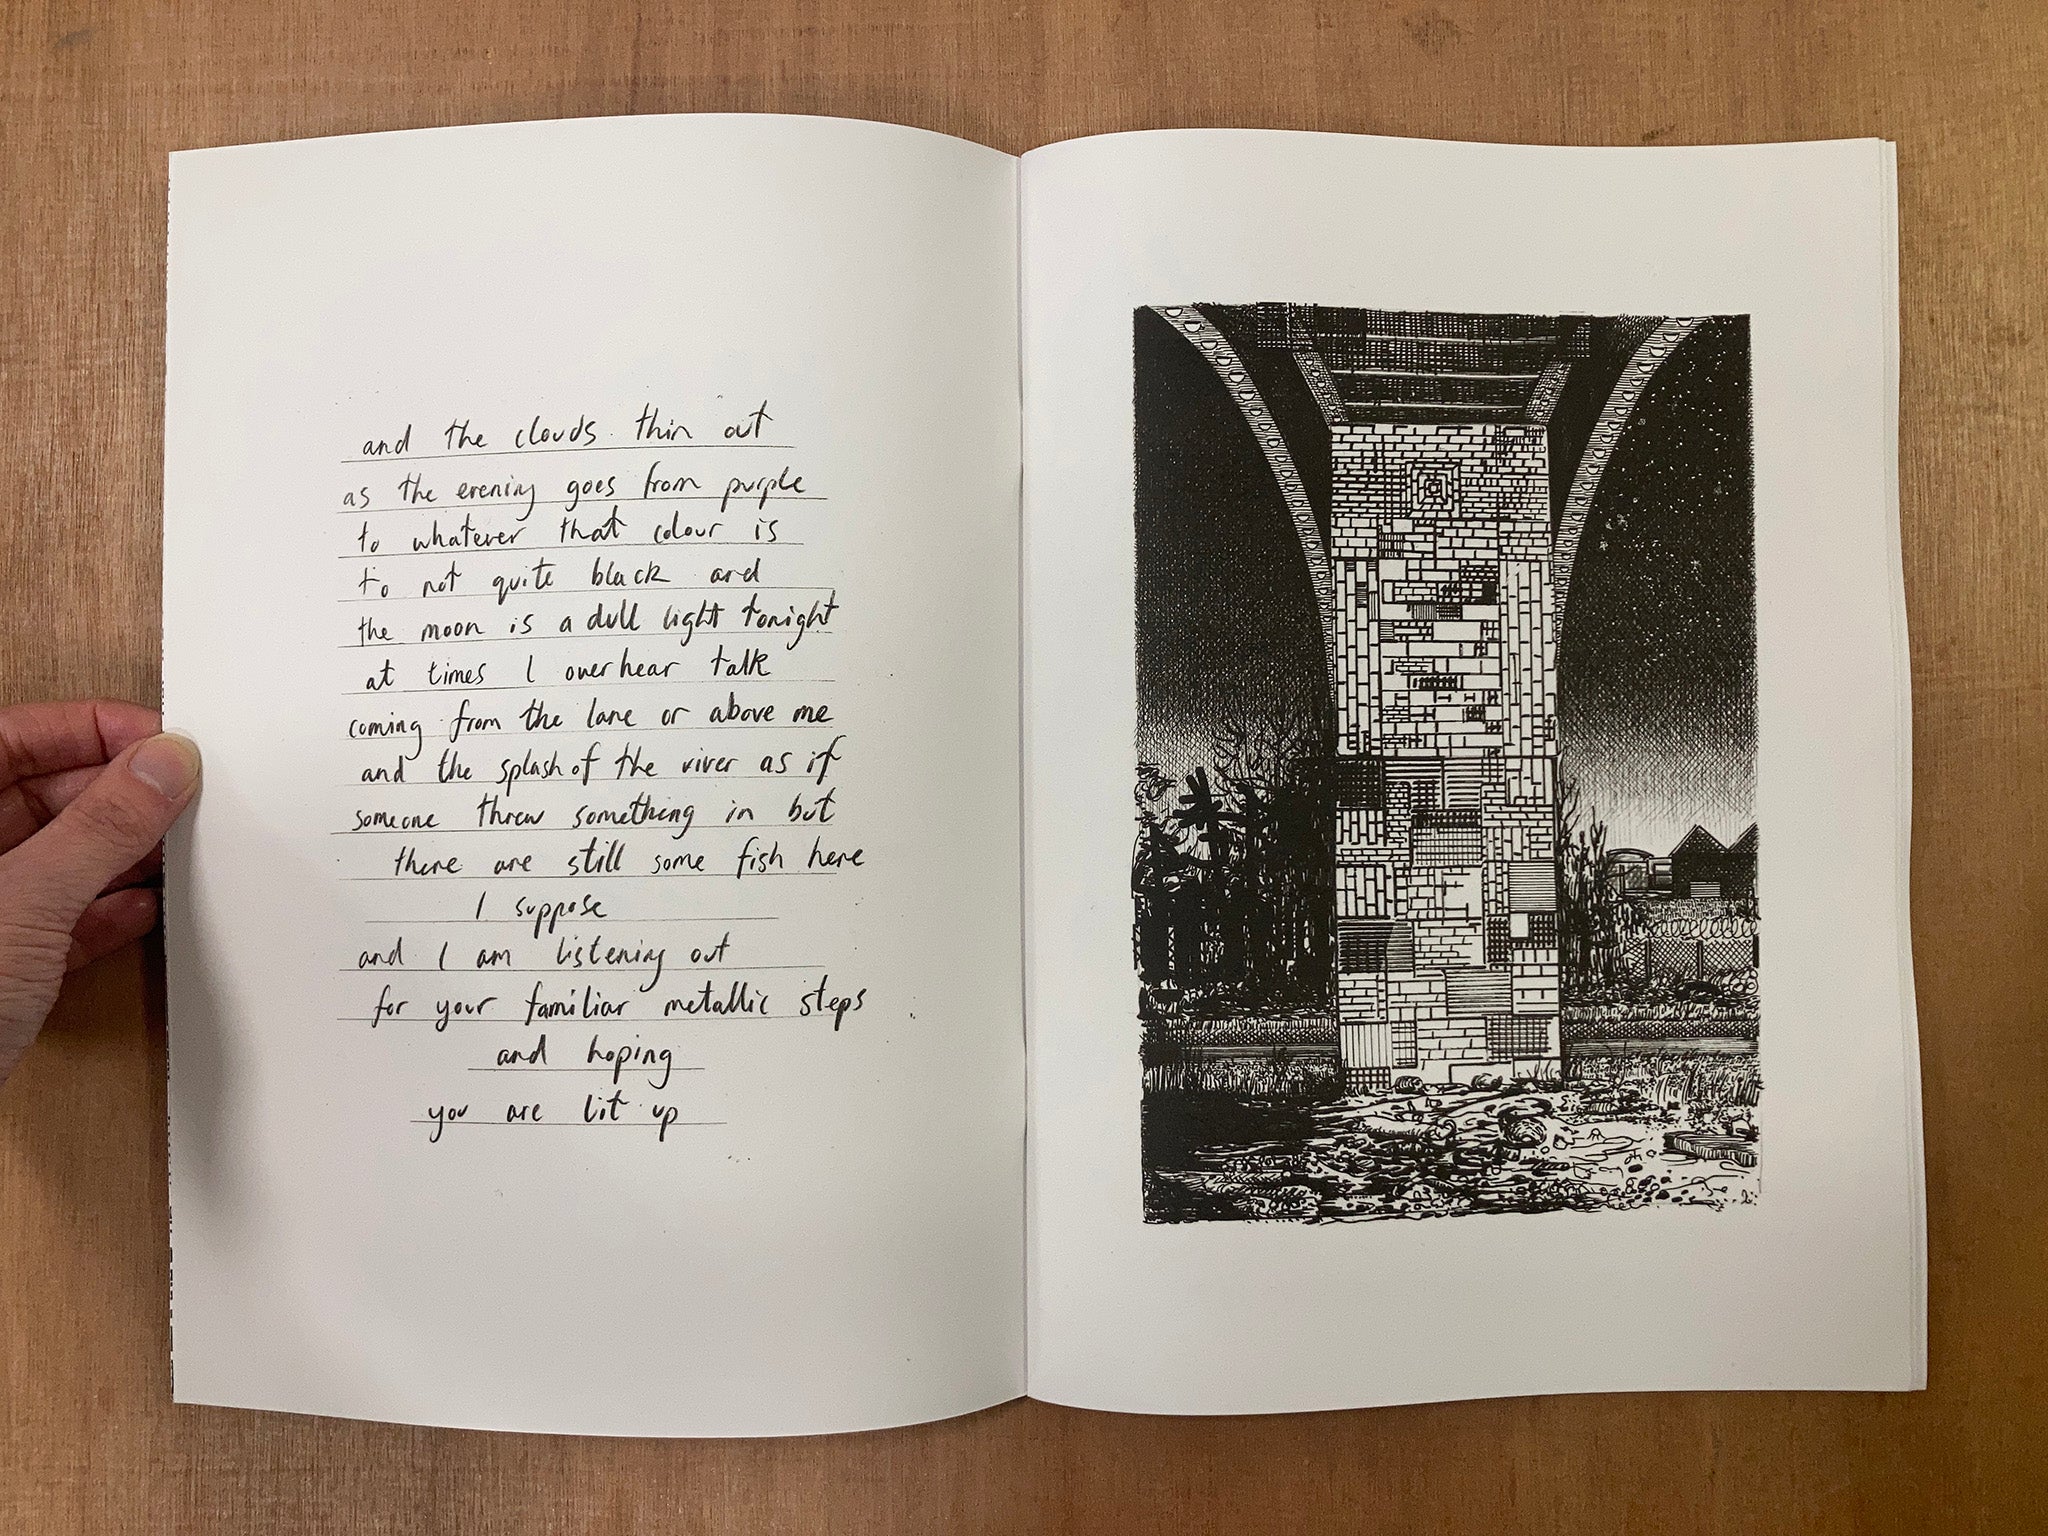 THE FLOATING BRIDGE #3 by Rob Churm and Malcy Duff